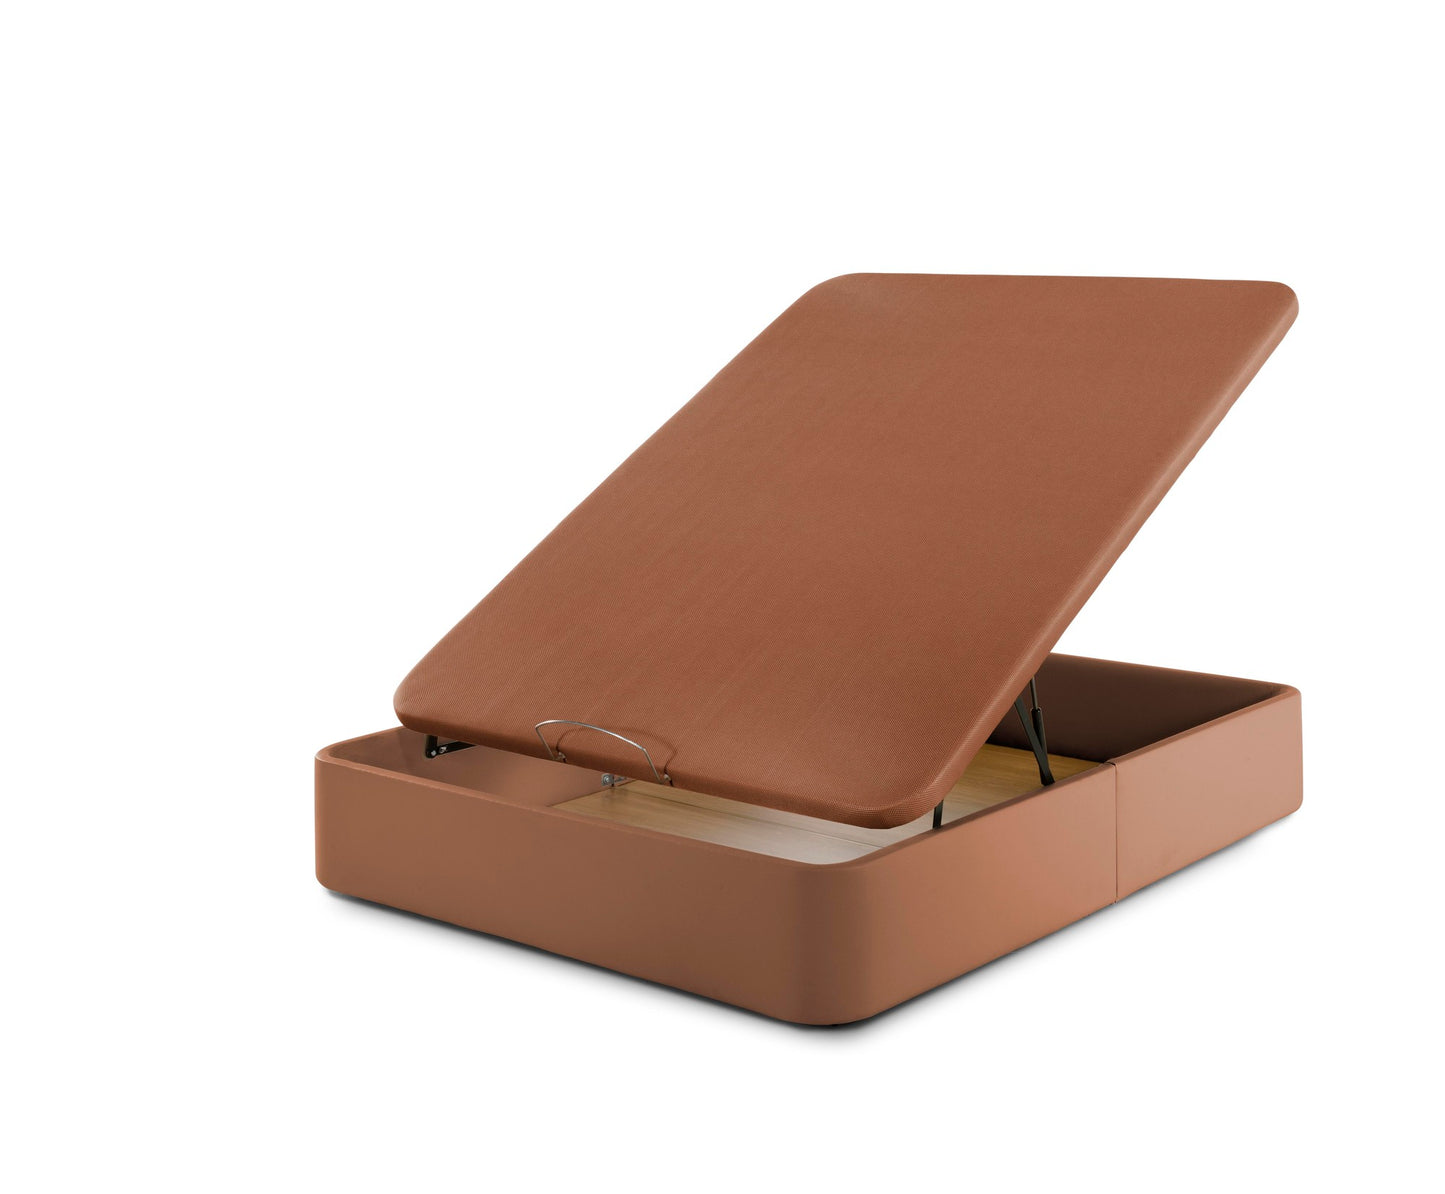 Pack Leatherette Canapé and Pharma Therapy Mattress | BROWN